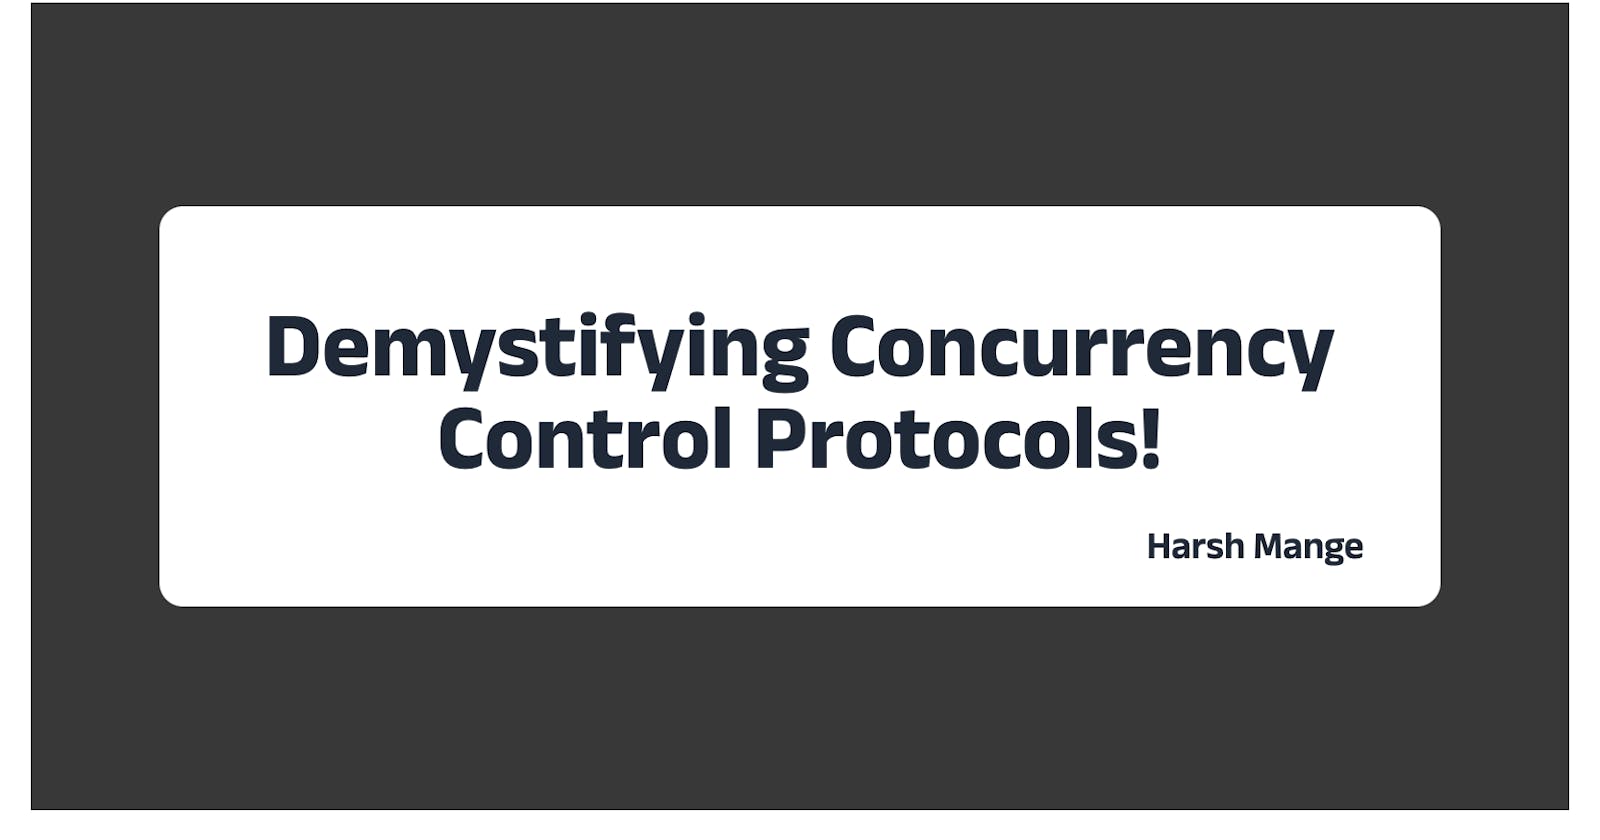 Demystifying Concurrency Control Protocols!